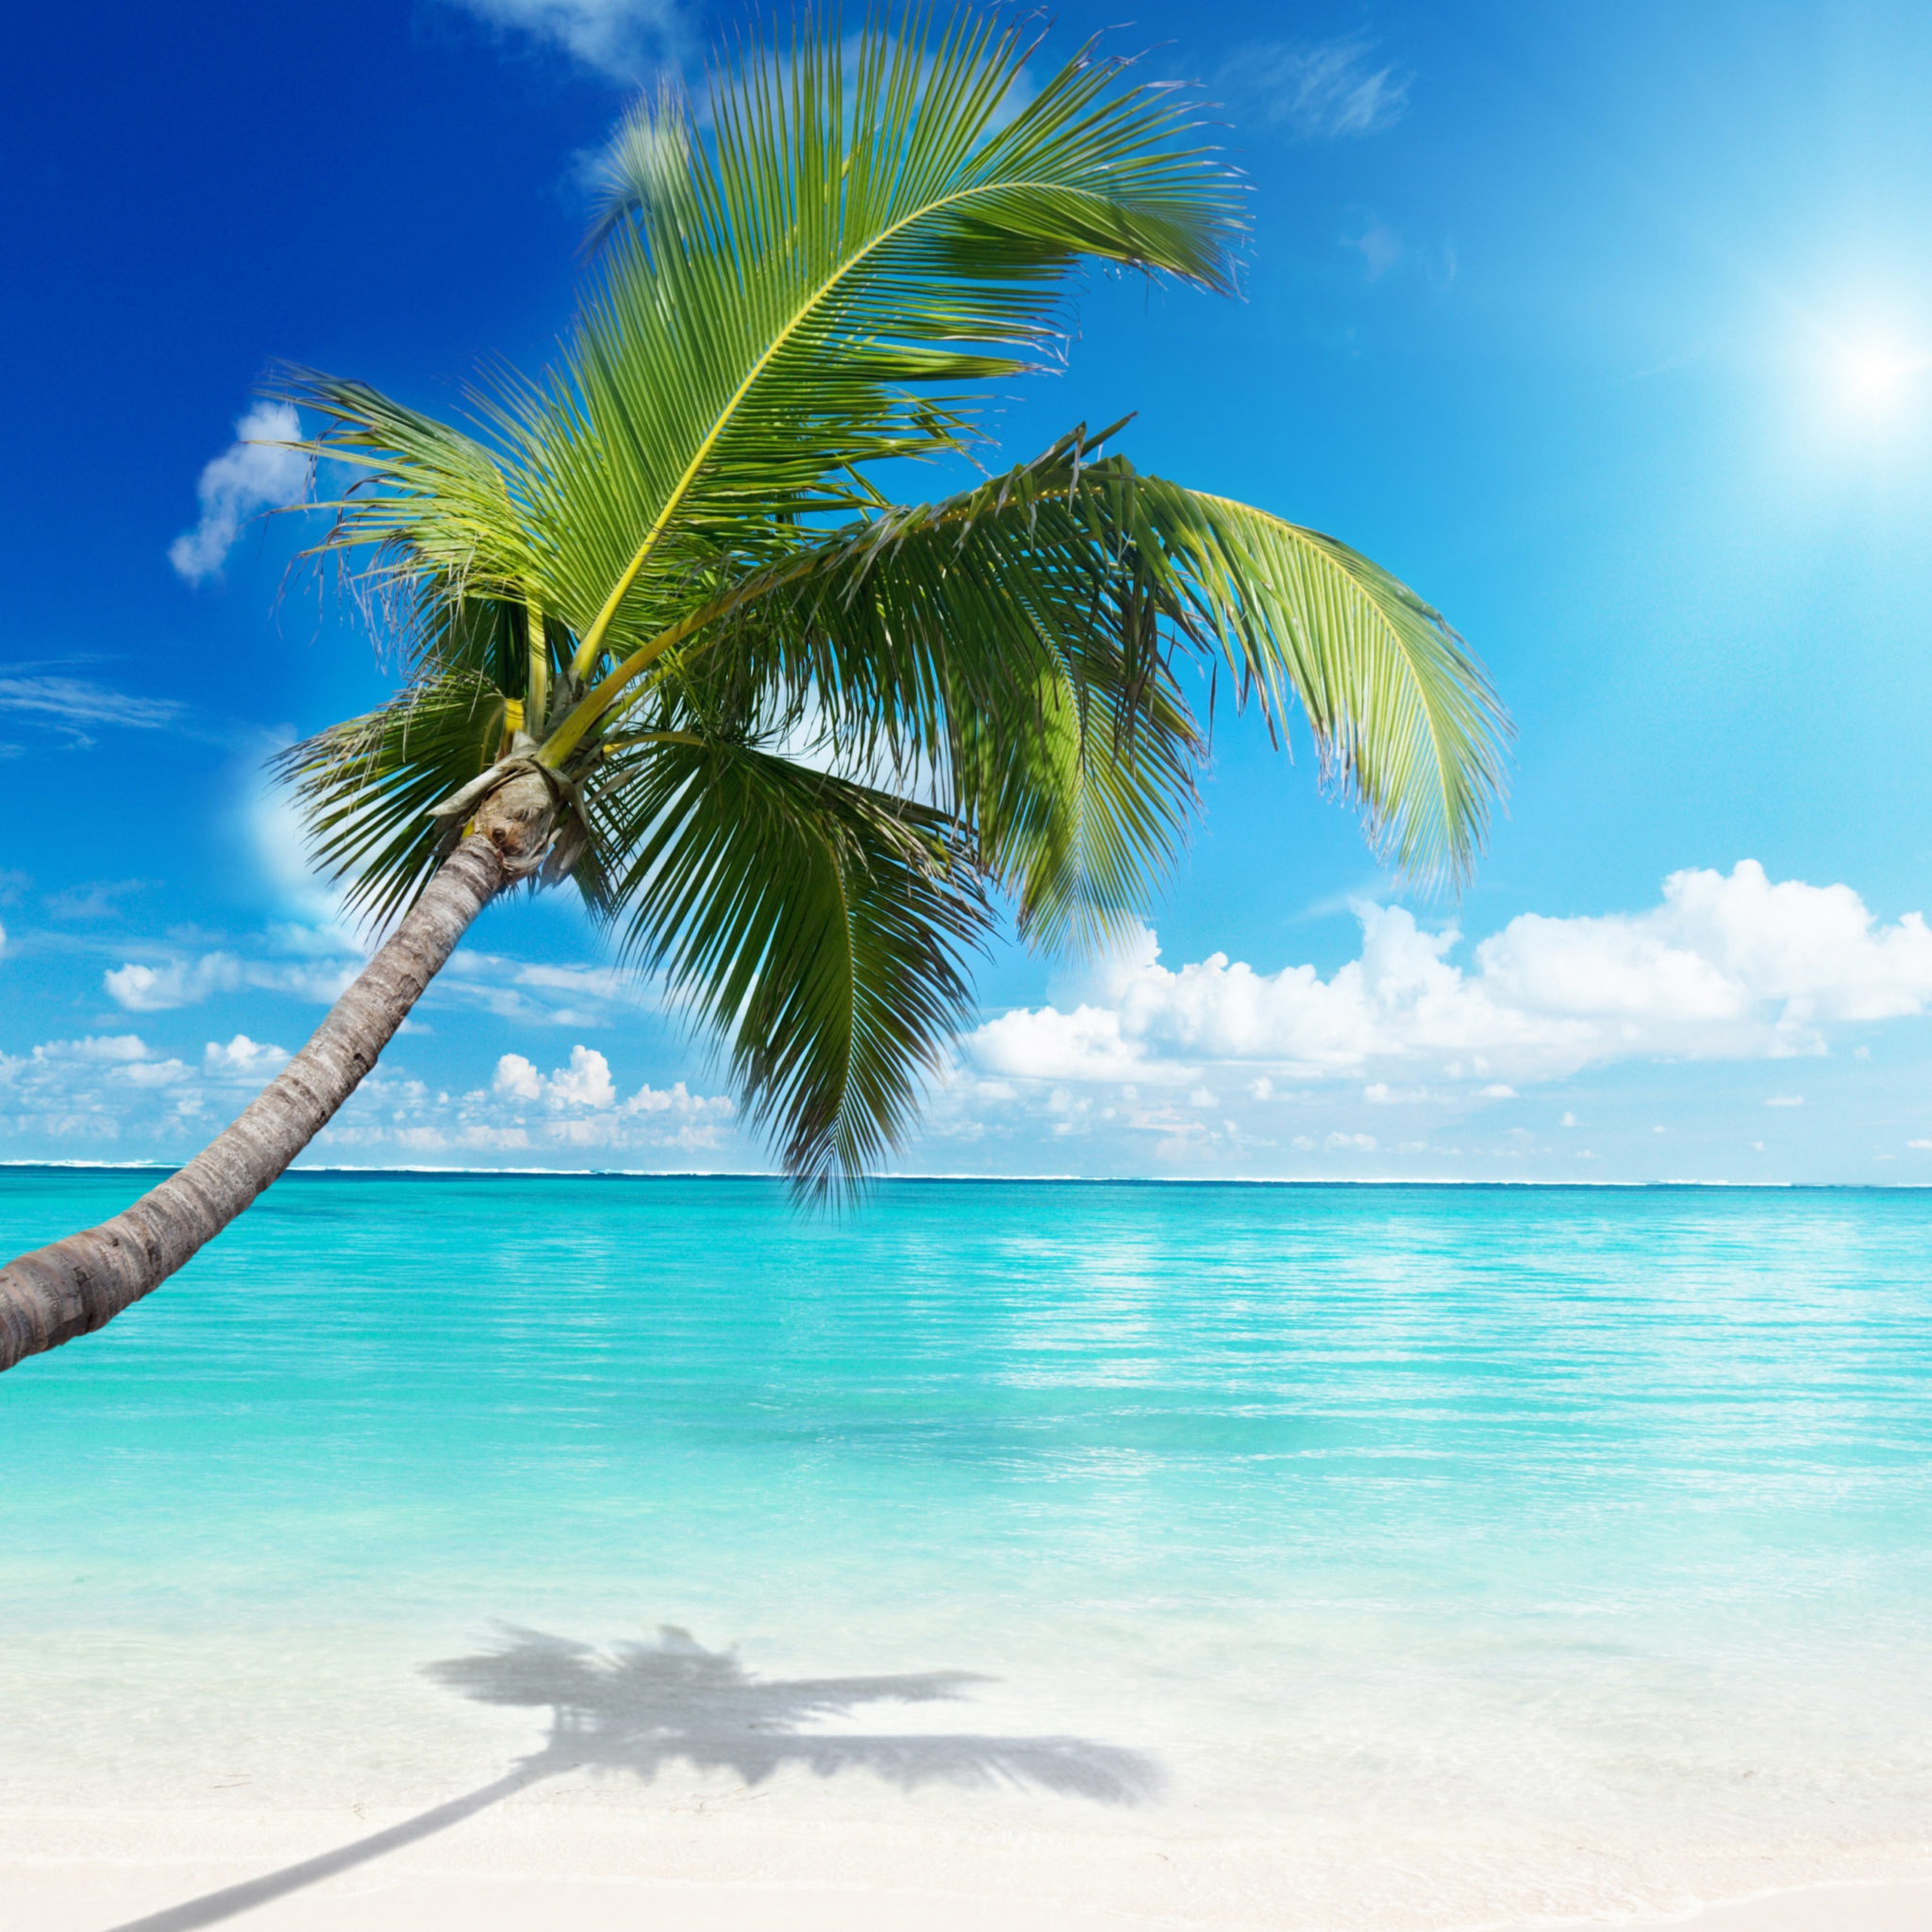 The Beach Amazing Nature Wallpaper Photos – HD Wallpapers Backgrounds Desktop, iphone & Android Free Download